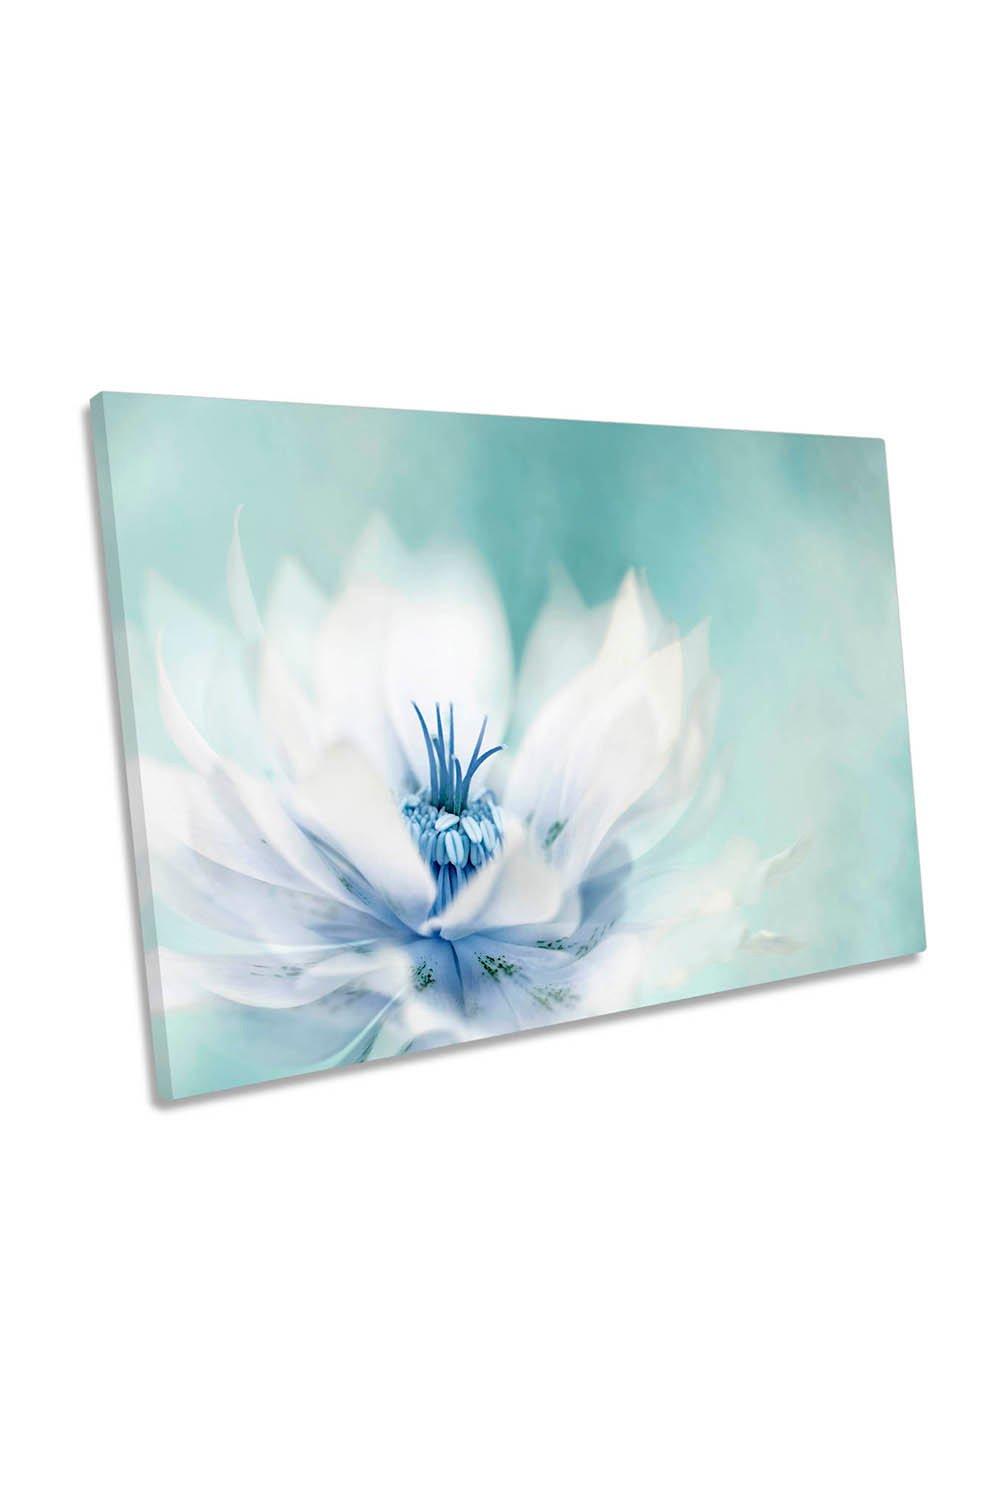 Ice Flow White Floral Turquoise Flower Canvas Wall Art Picture Print